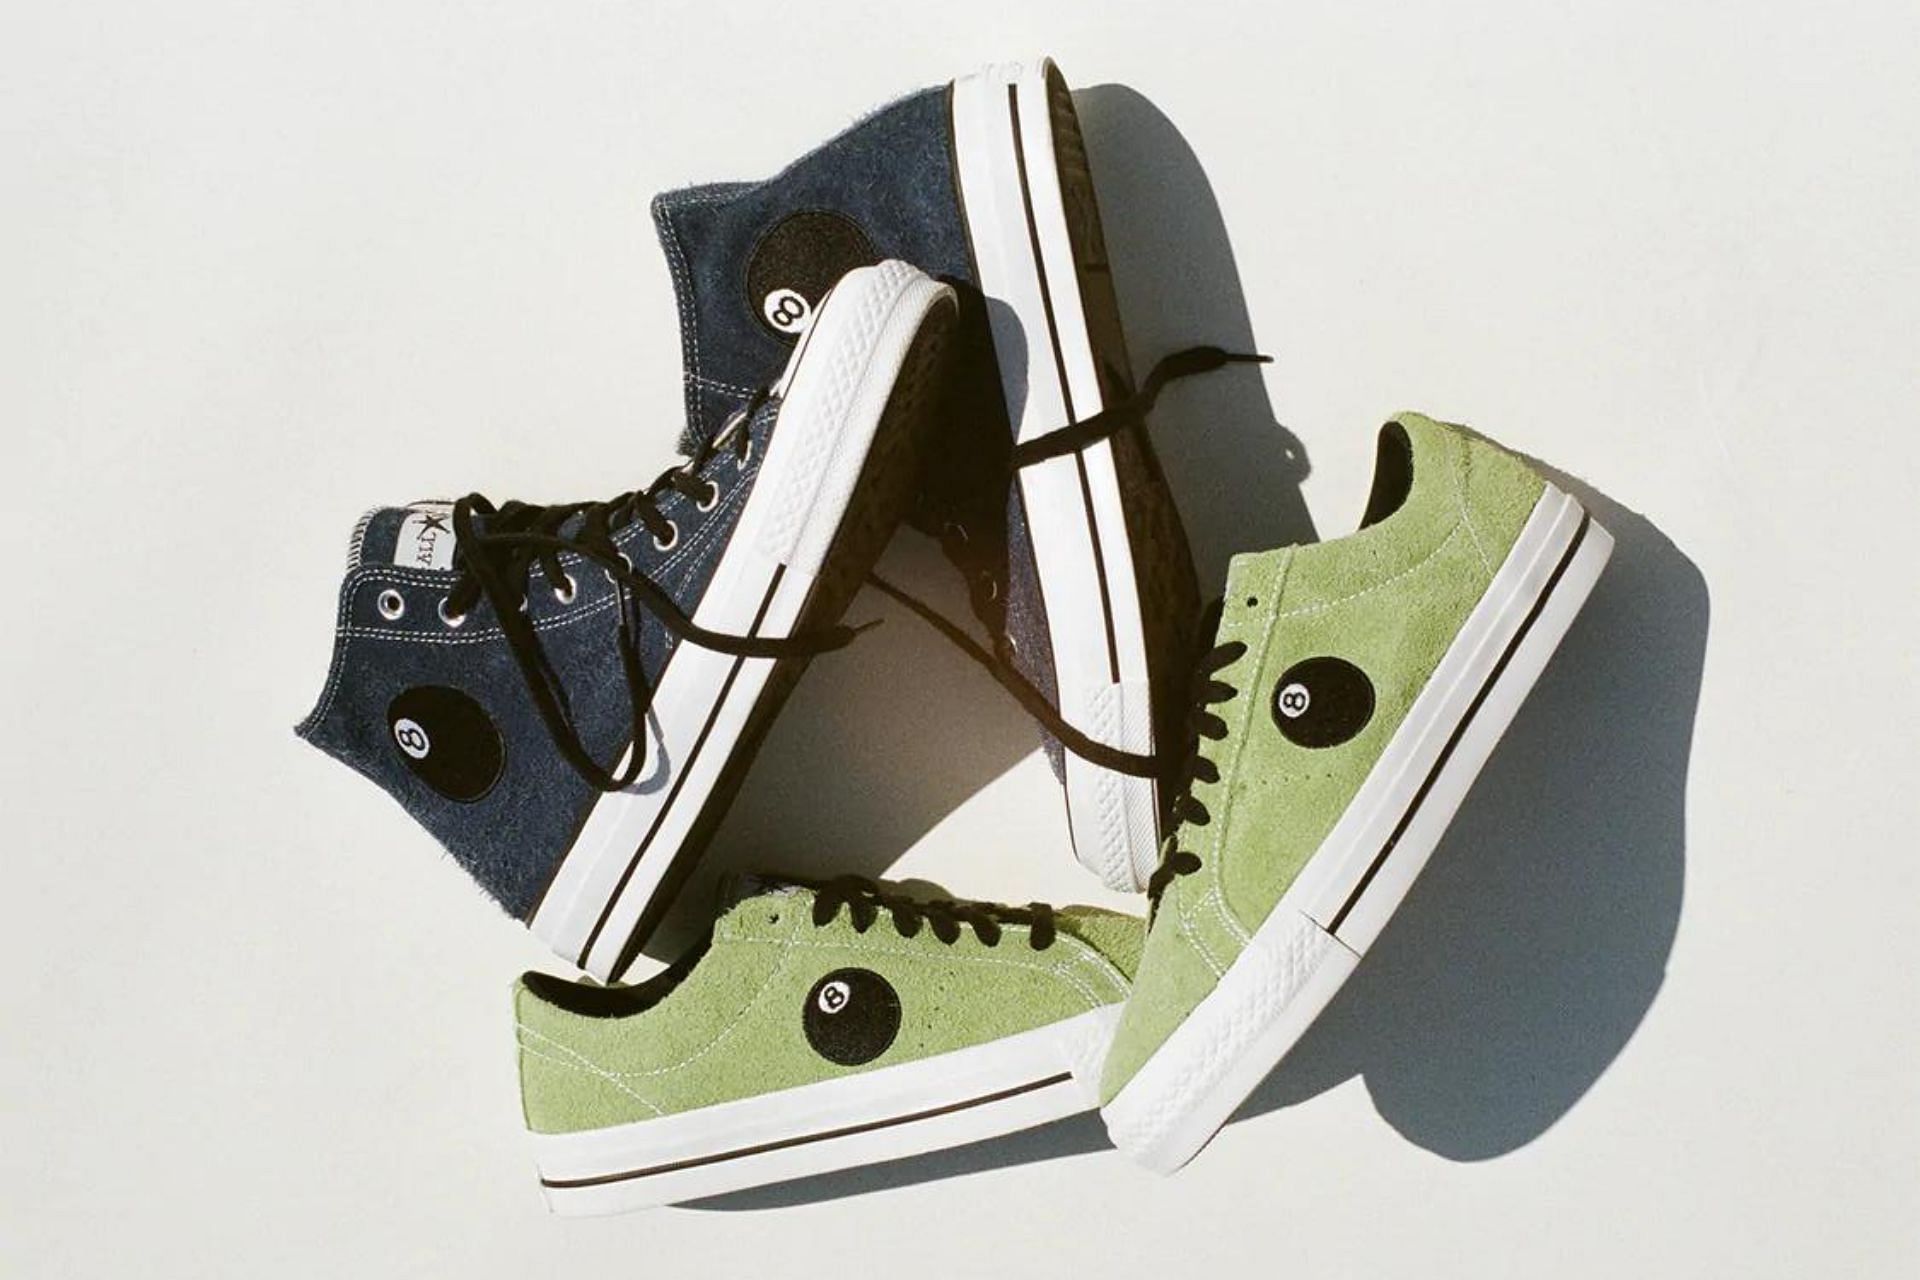 Upcoming Stussy x Converse 2-piece footwear collection featuring Chuck 70 and One-Star Pro silhouettes (Image via Stussy)